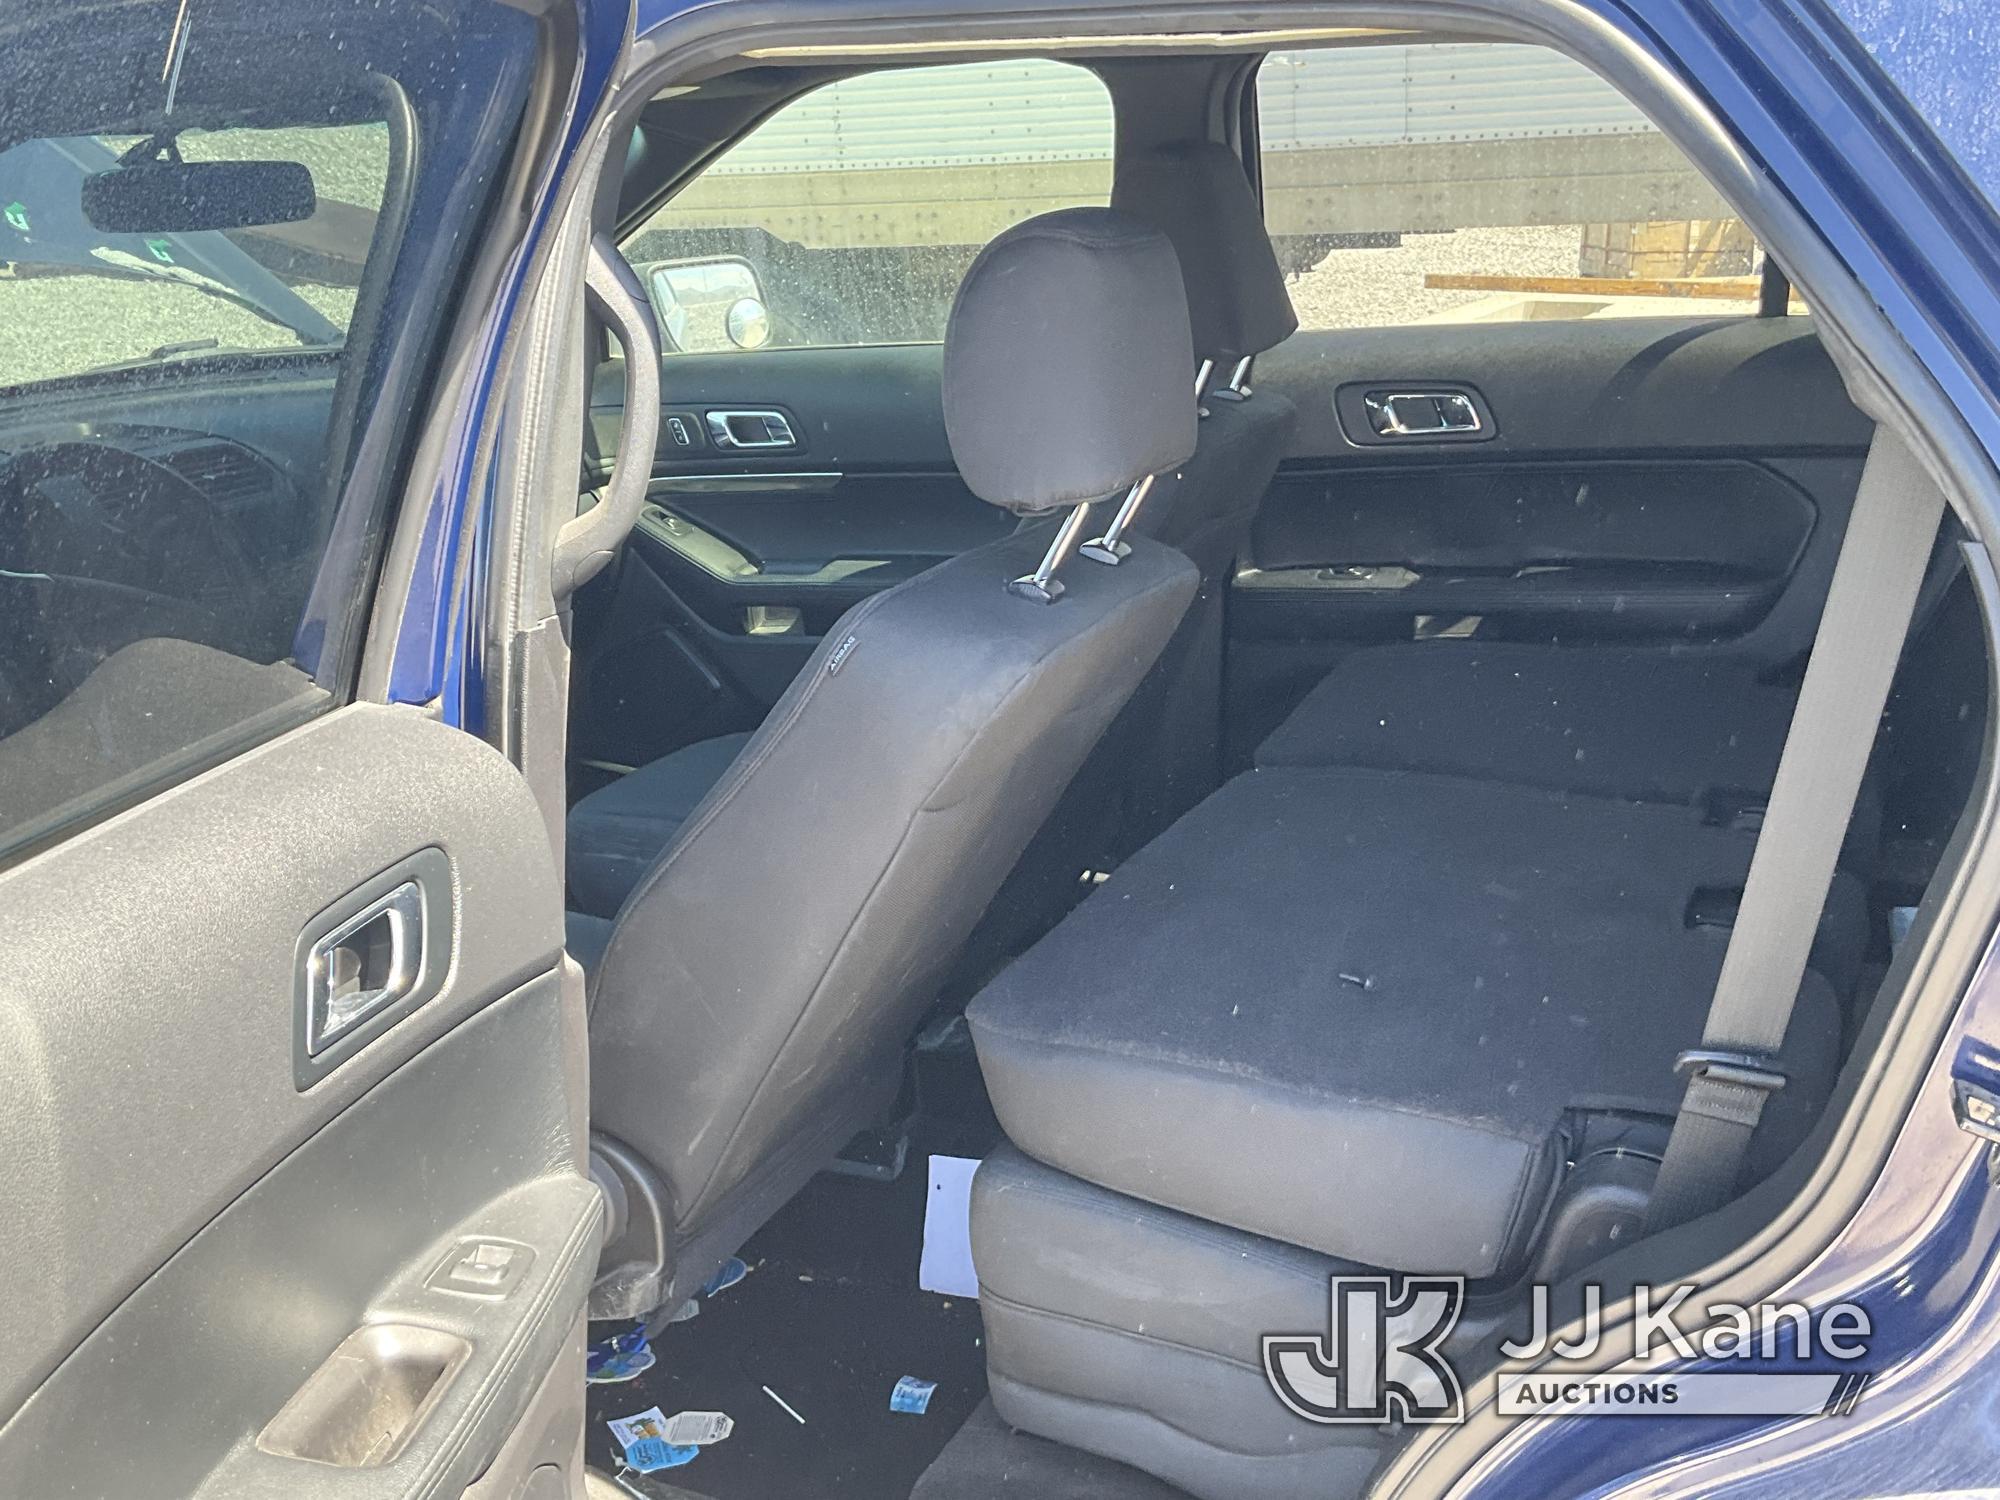 (Las Vegas, NV) 2018 Ford Explorer AWD Police Interceptor Towed In, No Console Body Damage, Does Not